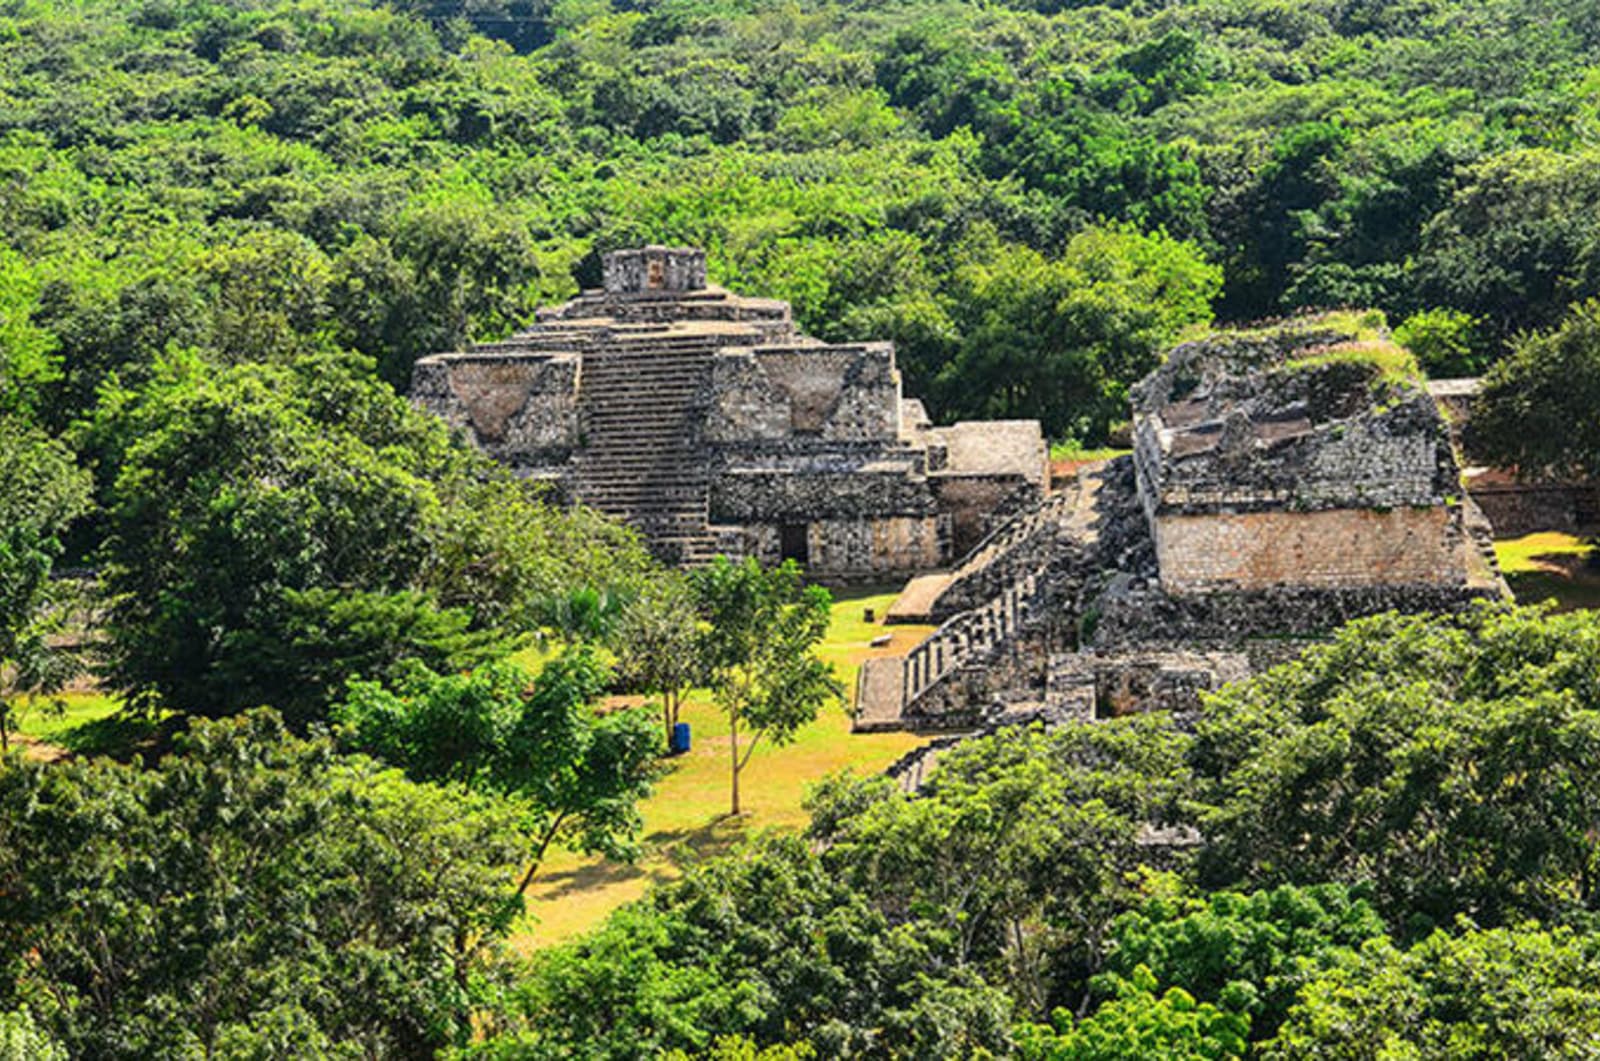 Ek Balam, an ancient Mayan city surrounded by trees